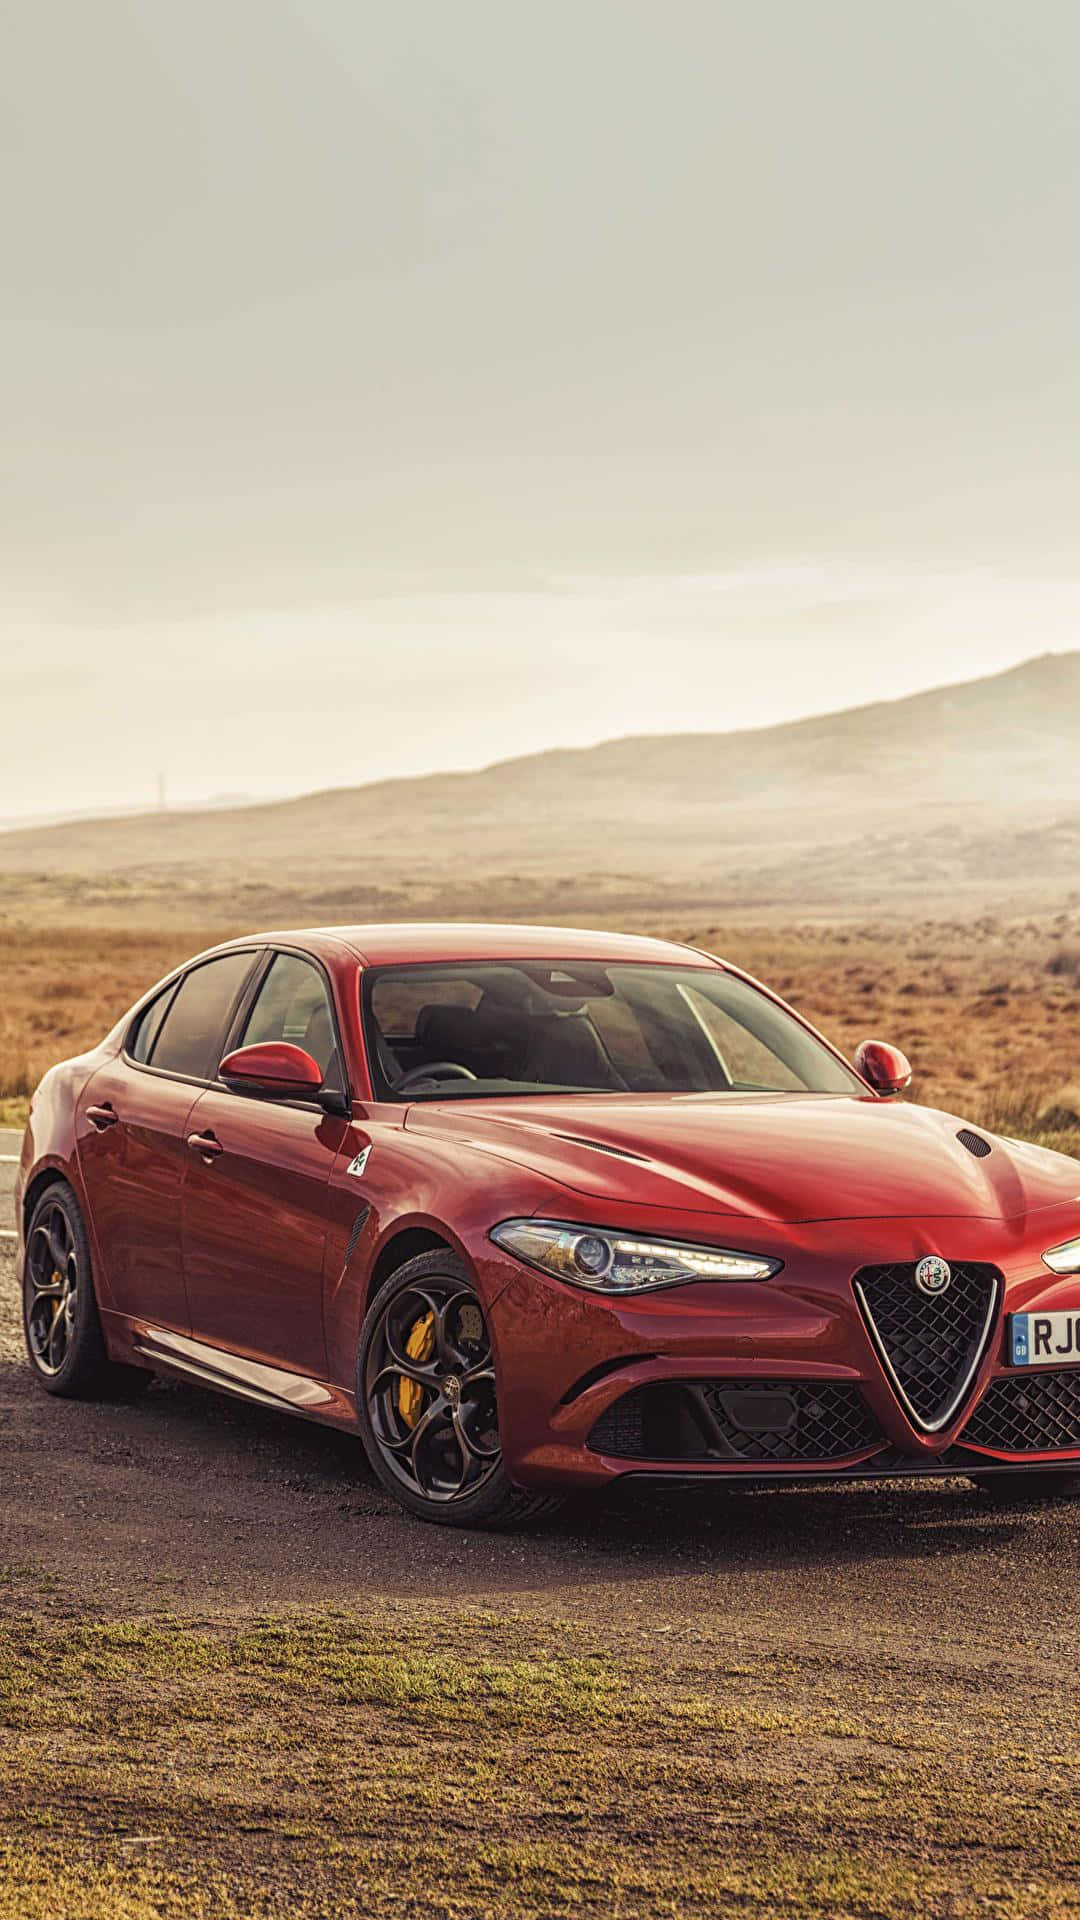 Cruise in Style with an Alfa Romeo